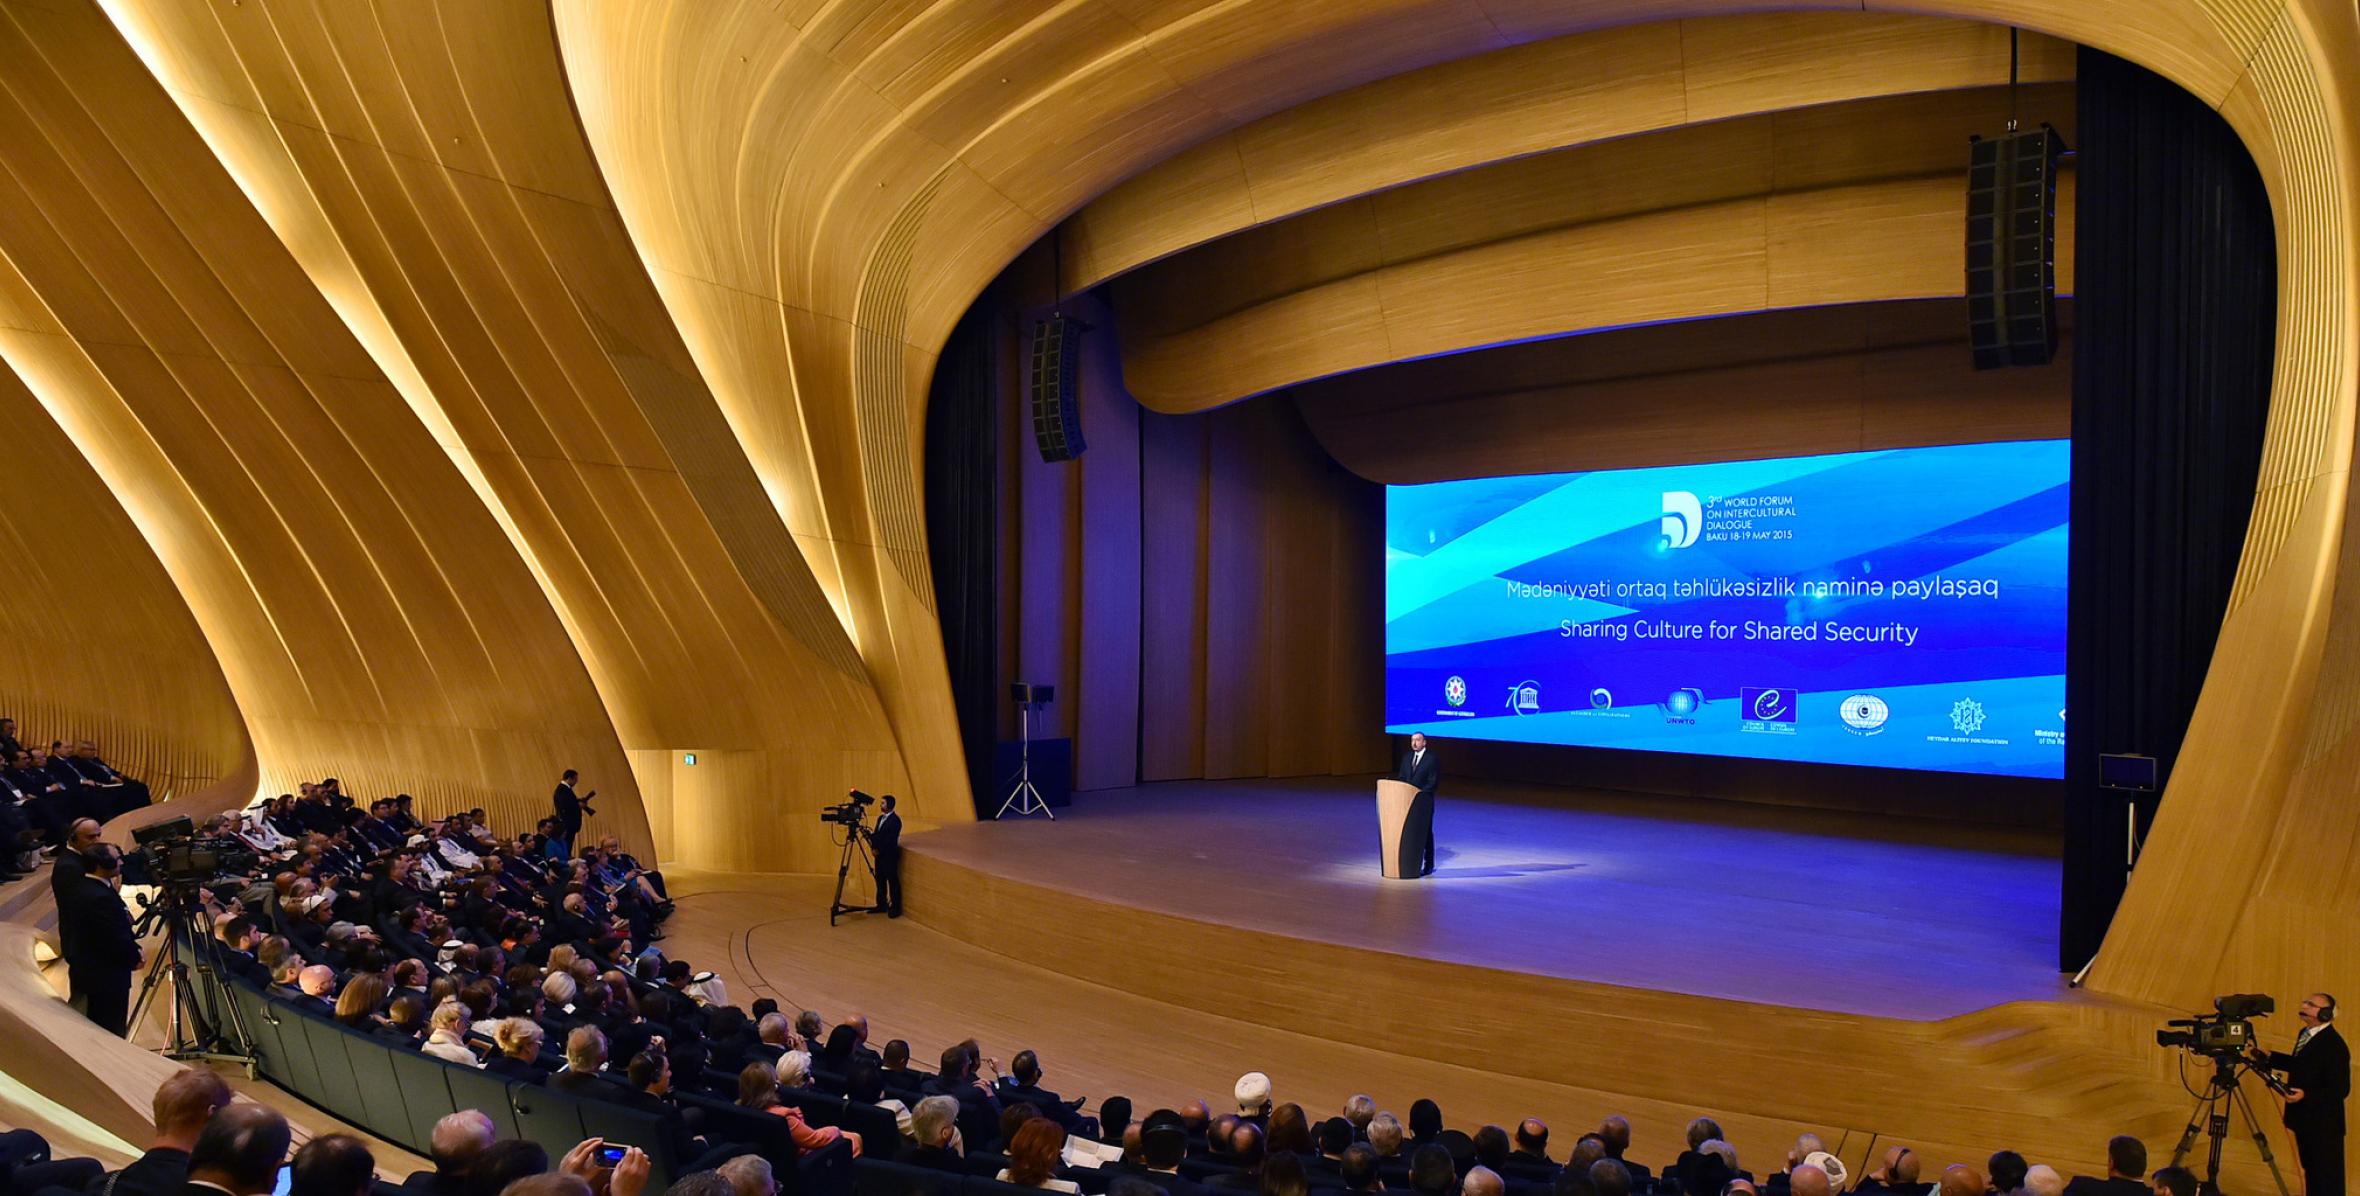 Speech by Ilham Aliyev at the opening of the 3rd World Forum on Intercultural Dialogue